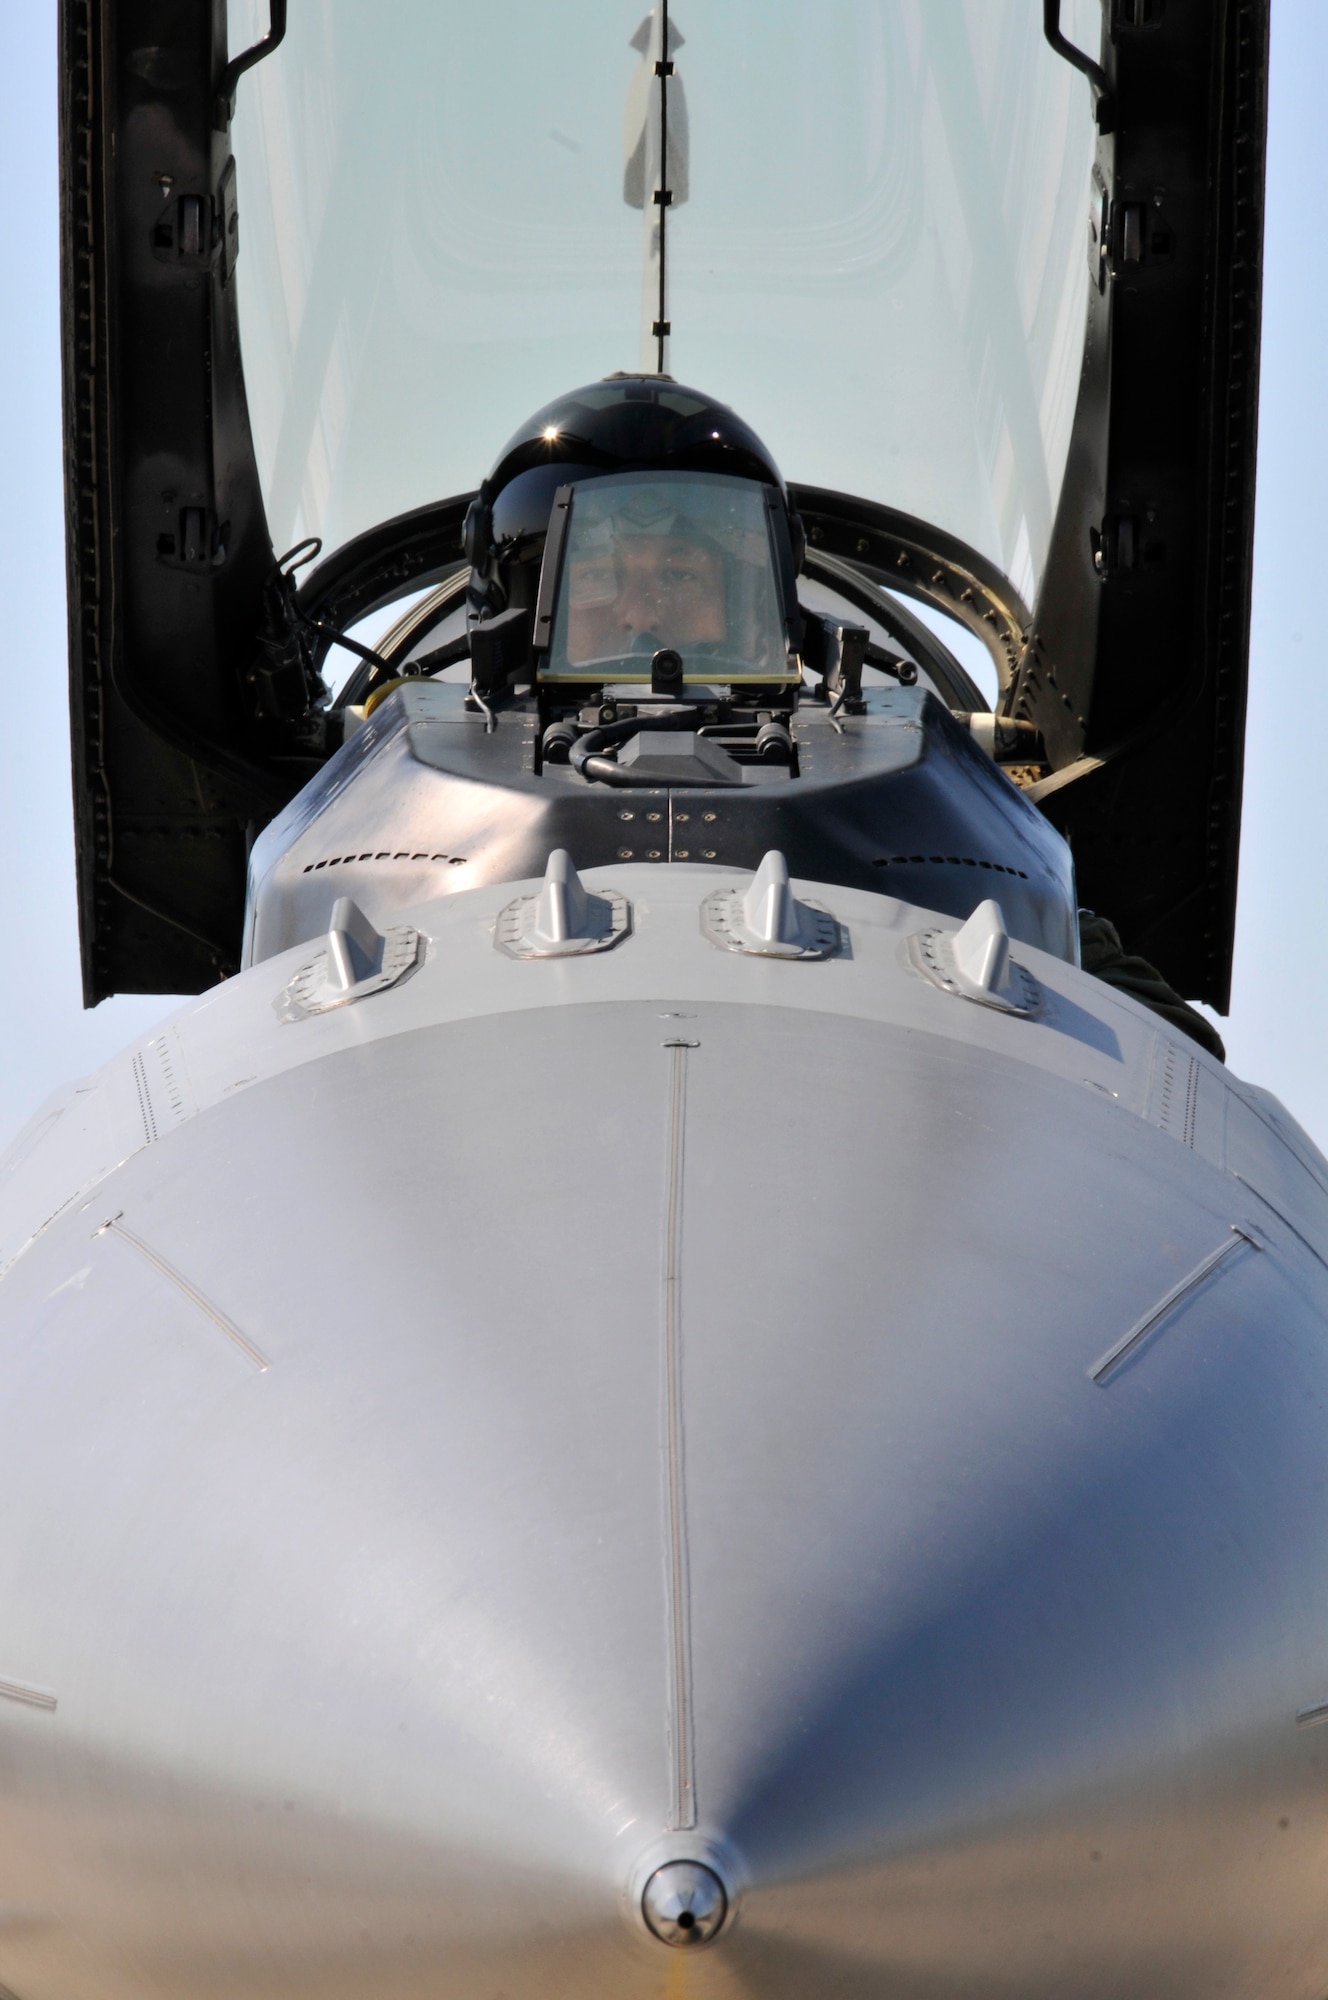 A picture of U.S. Air Force Lt. Col. Philippe Malebranche, F-16 pilot, preparing to start the turbine engine, close the canopy and taxi his Fighting Falcon to take off.